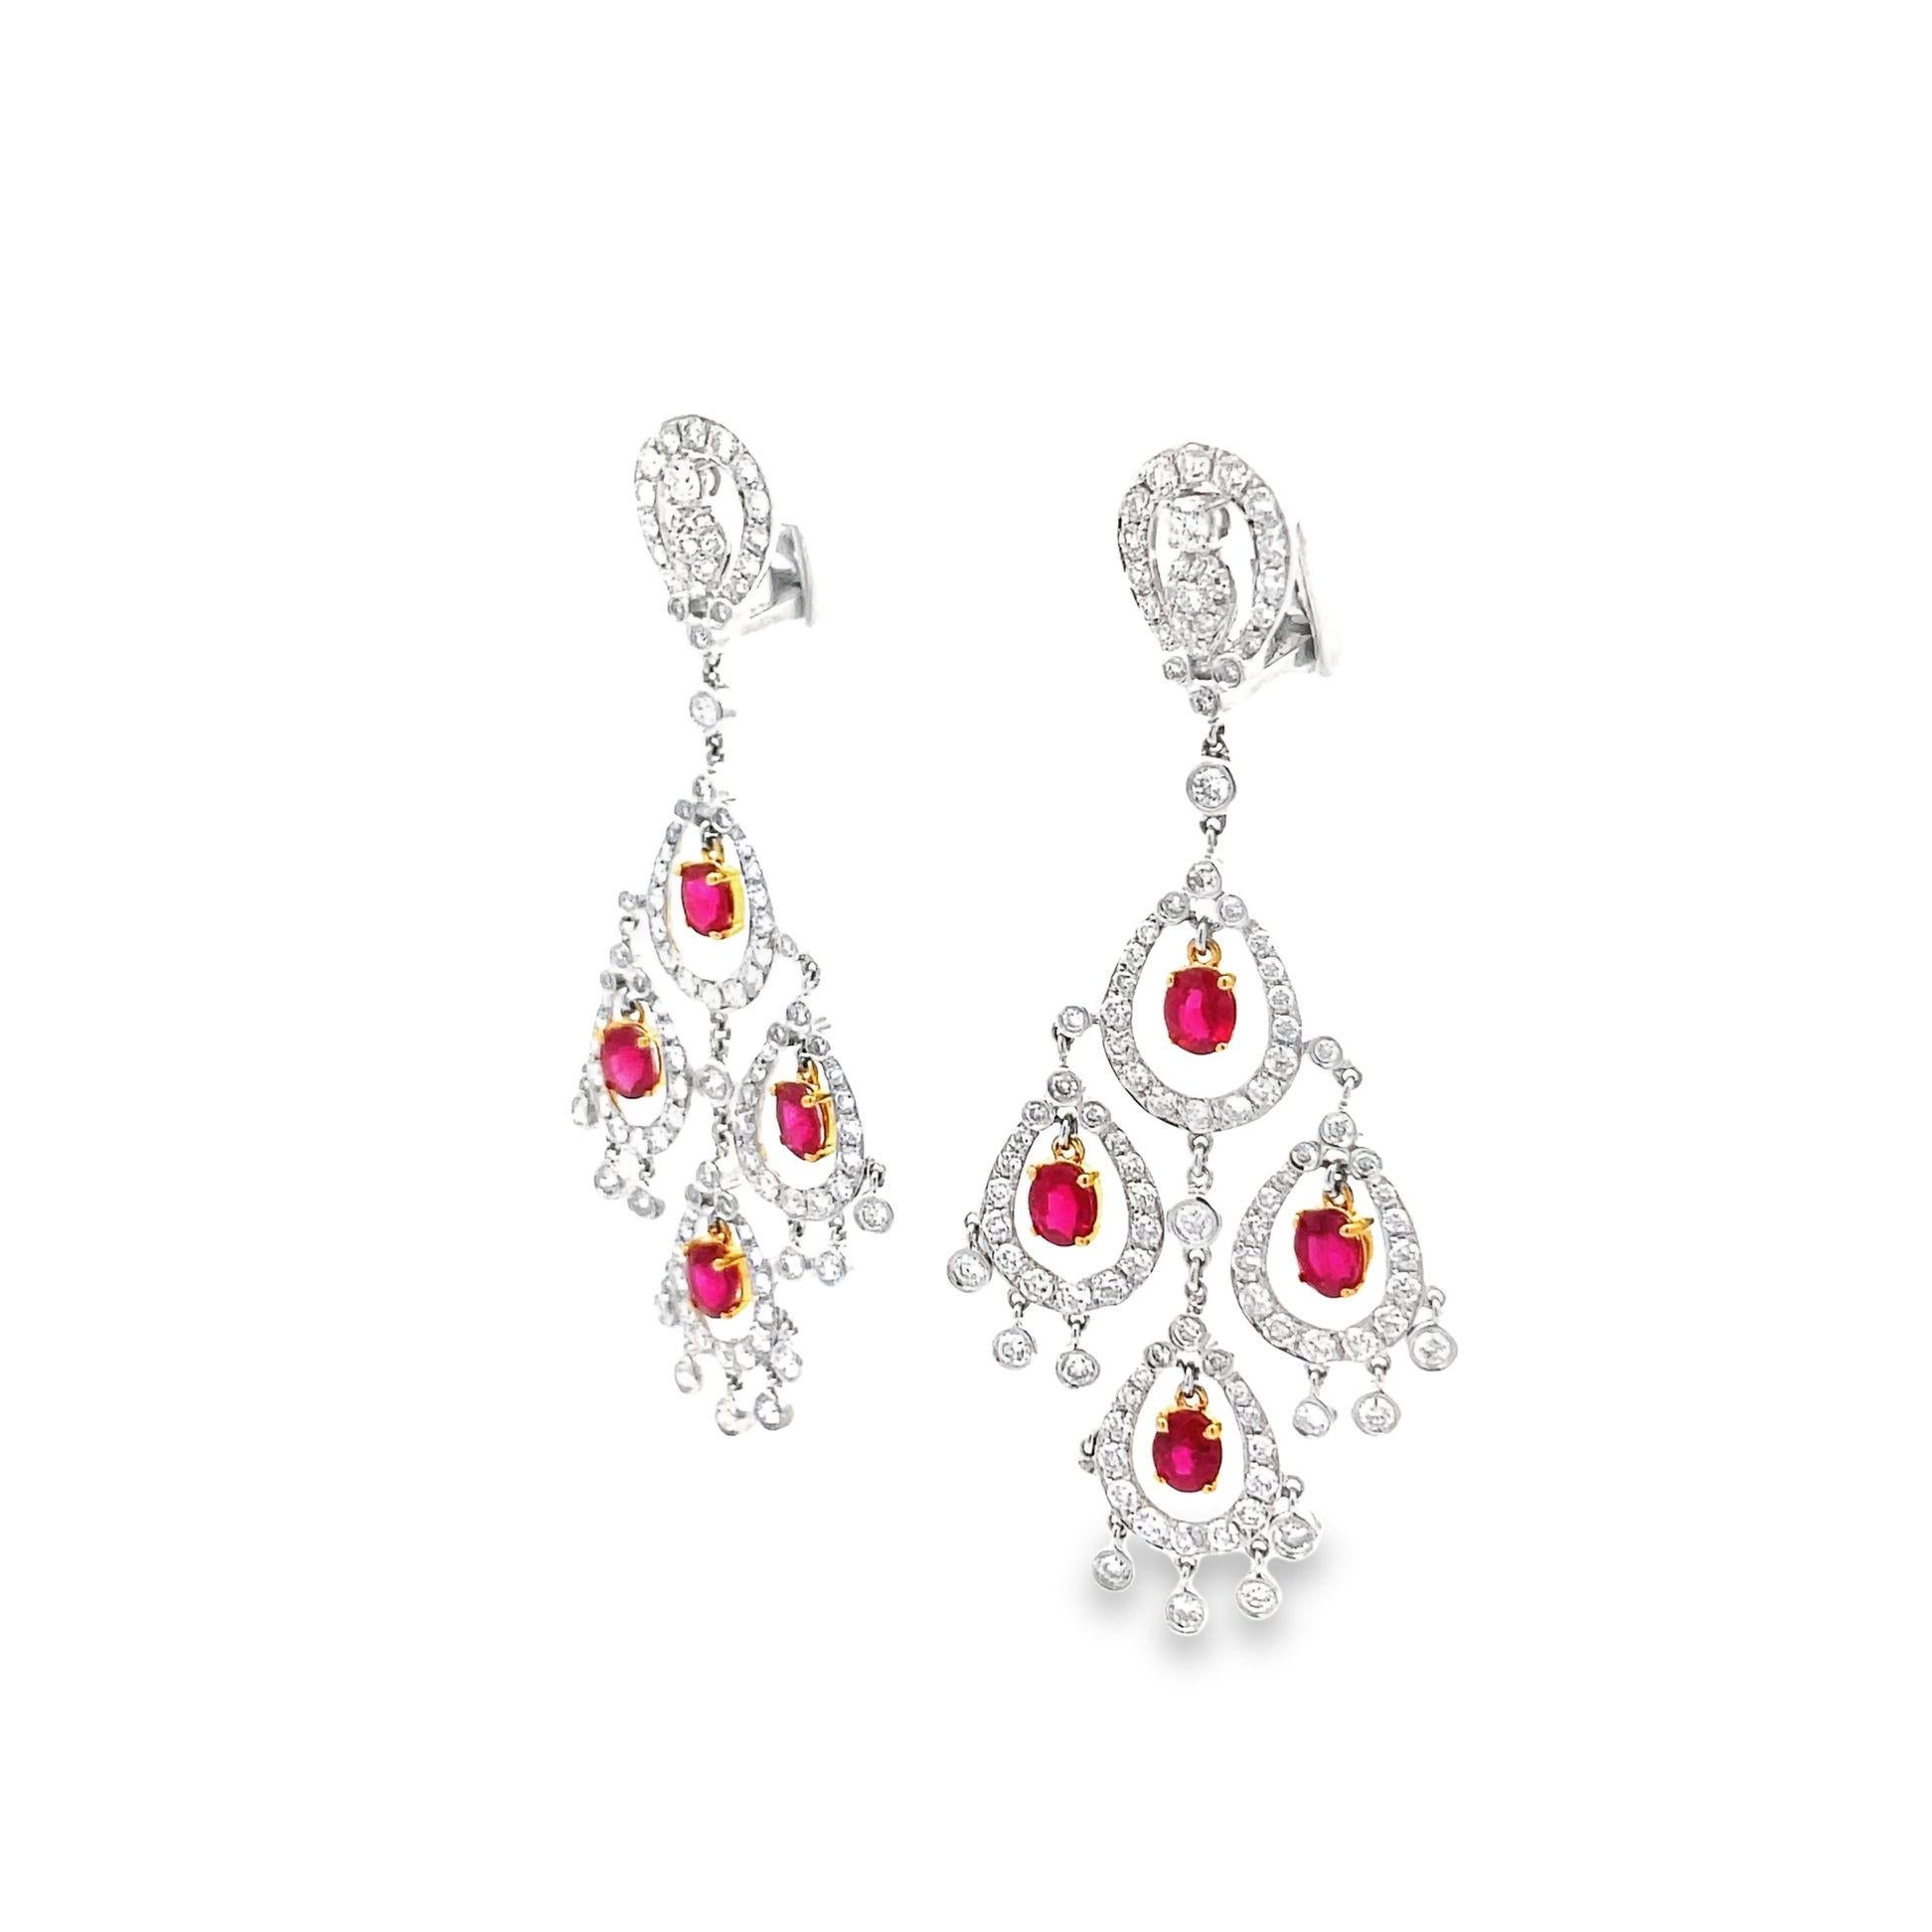 A lovely pair of gold chandelier earrings featuring 4.30 carats of VS quality round cut diamonds and 4.06 carats of vivid red oval shaped rubies. The diamonds are set in 18K white gold while the rubies are set in 18K yellow gold, a great two-tone